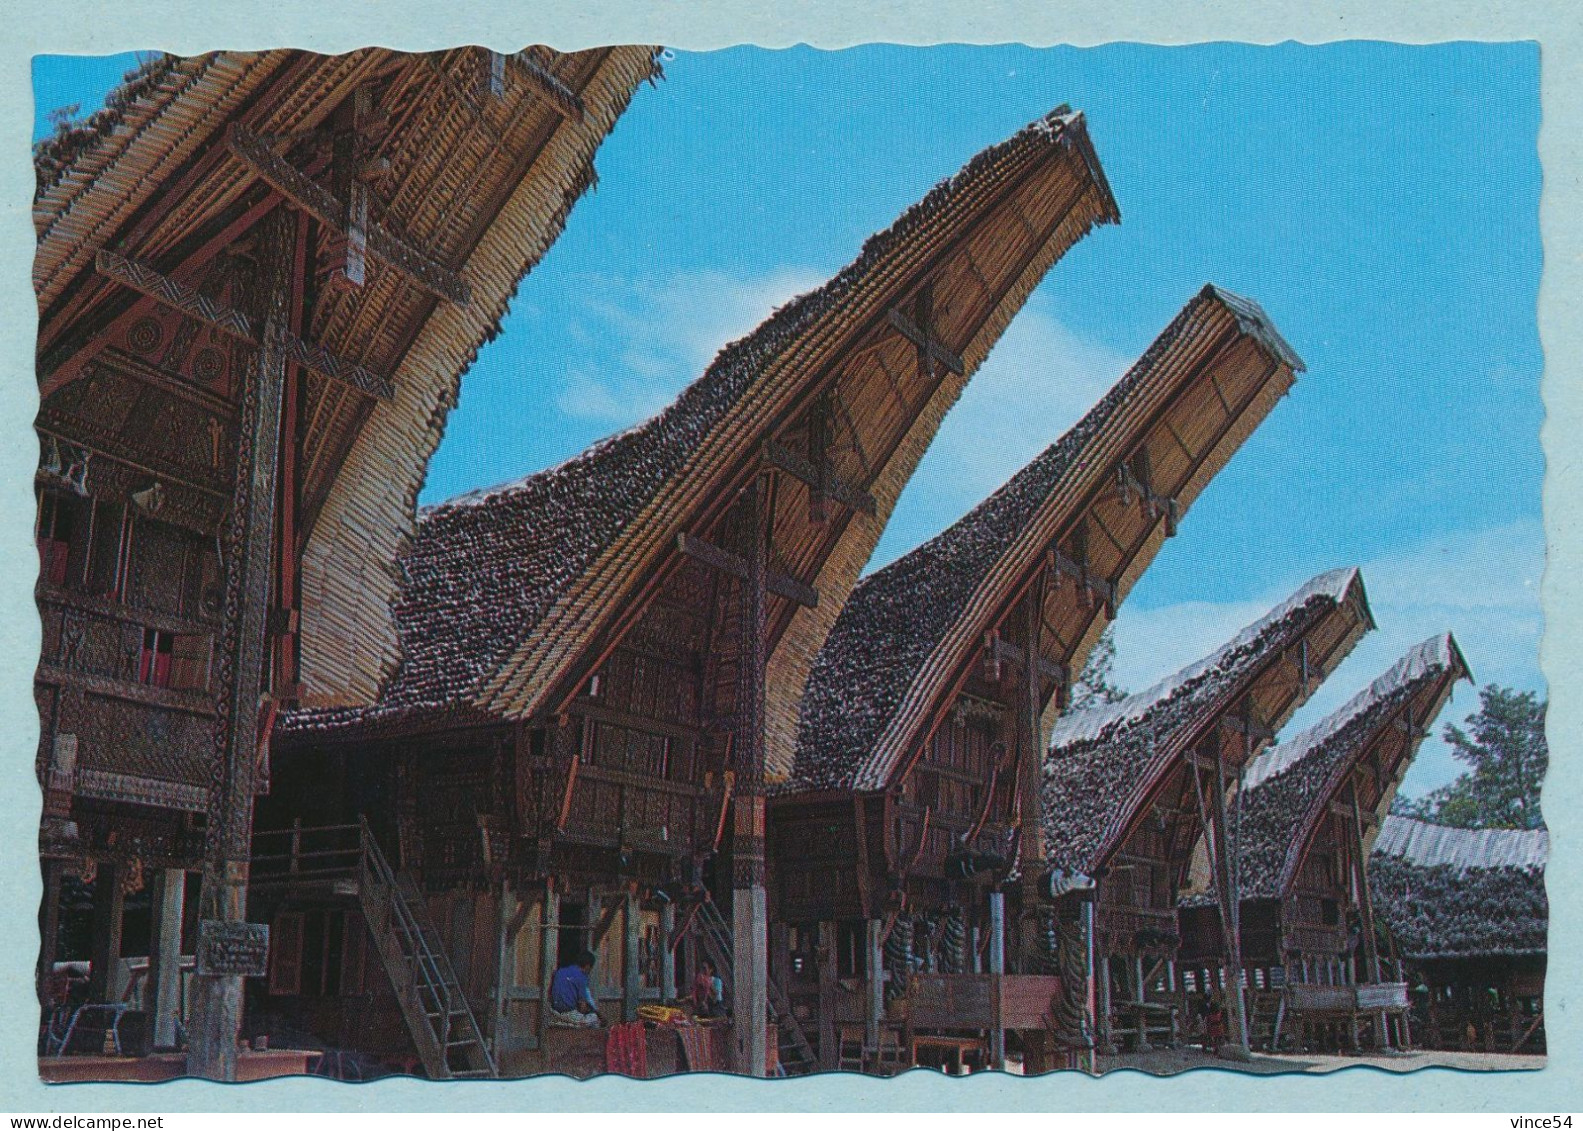 A Row Of Traditional Houses At Palawa Tana Toraja, South Sulawesi - Indonesien